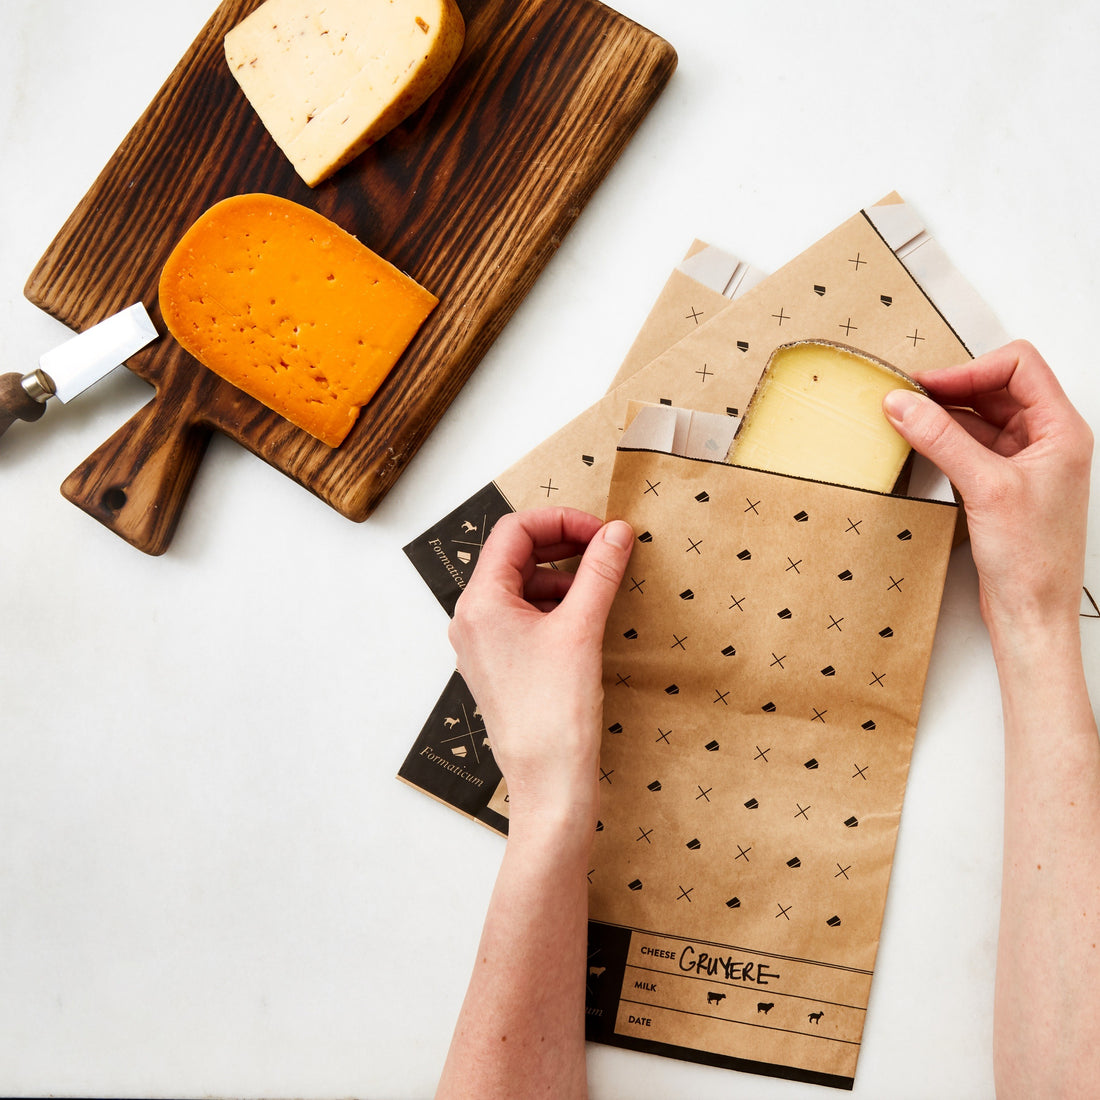 Cheese Storage At Home: Cheese Storage Containers and Cheese Storage Bags -  The Flavor Dance